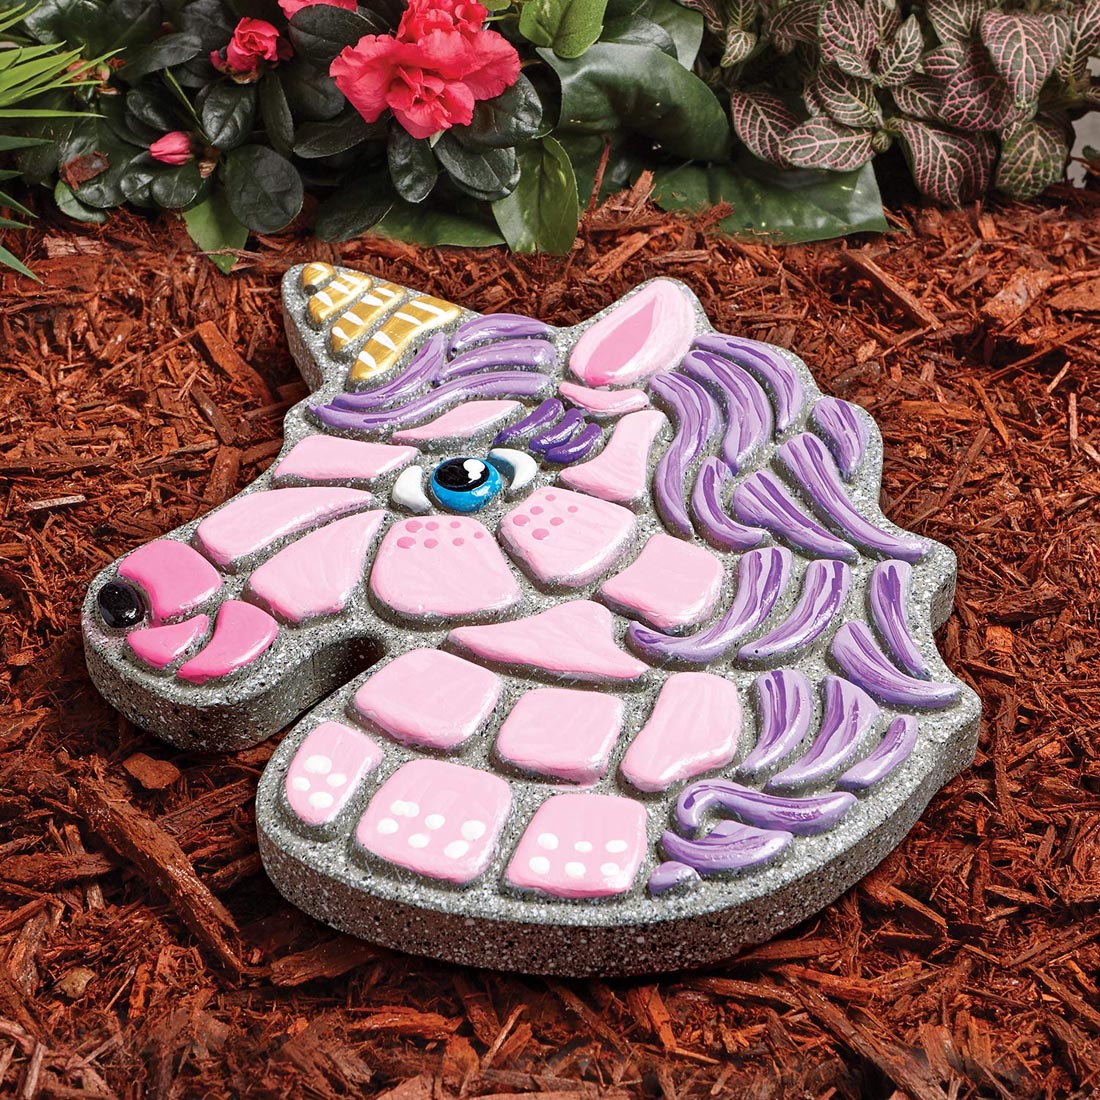 A completed Paint Your Own Stepping Stone Unicorn Kit